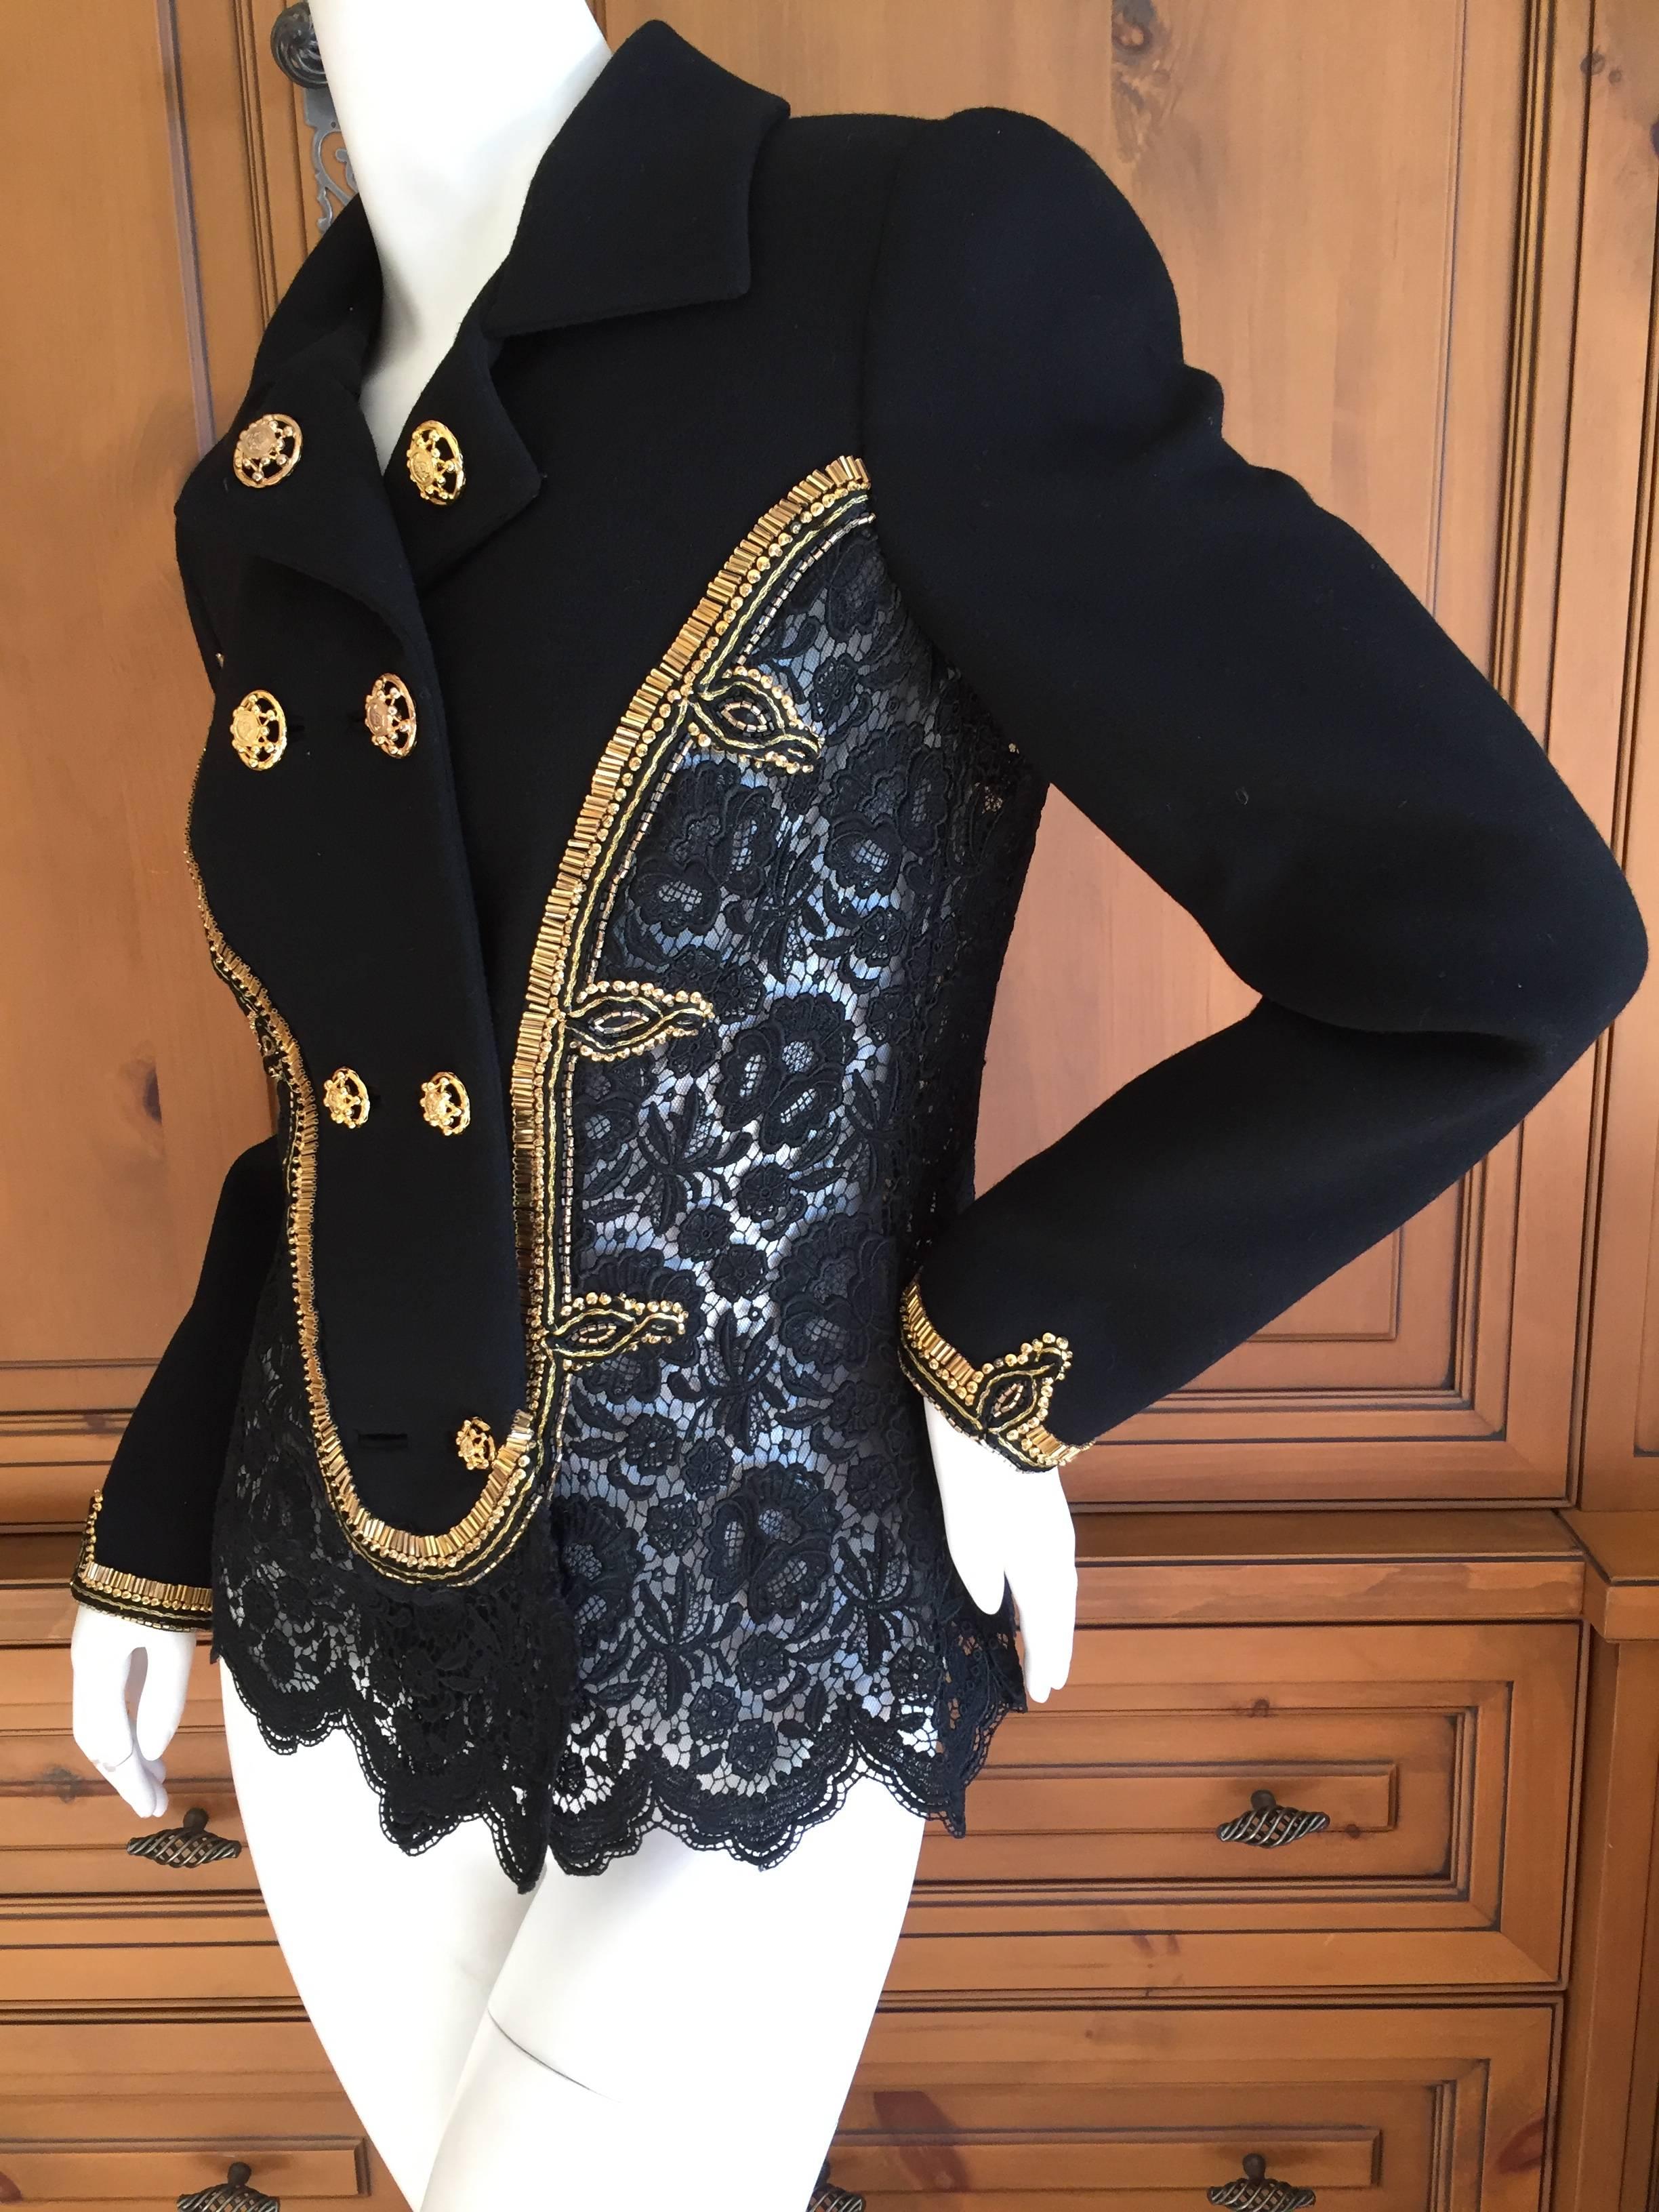 Gianni Versace Couture 1992 Beaded Black Lace Jacket In Excellent Condition For Sale In Cloverdale, CA